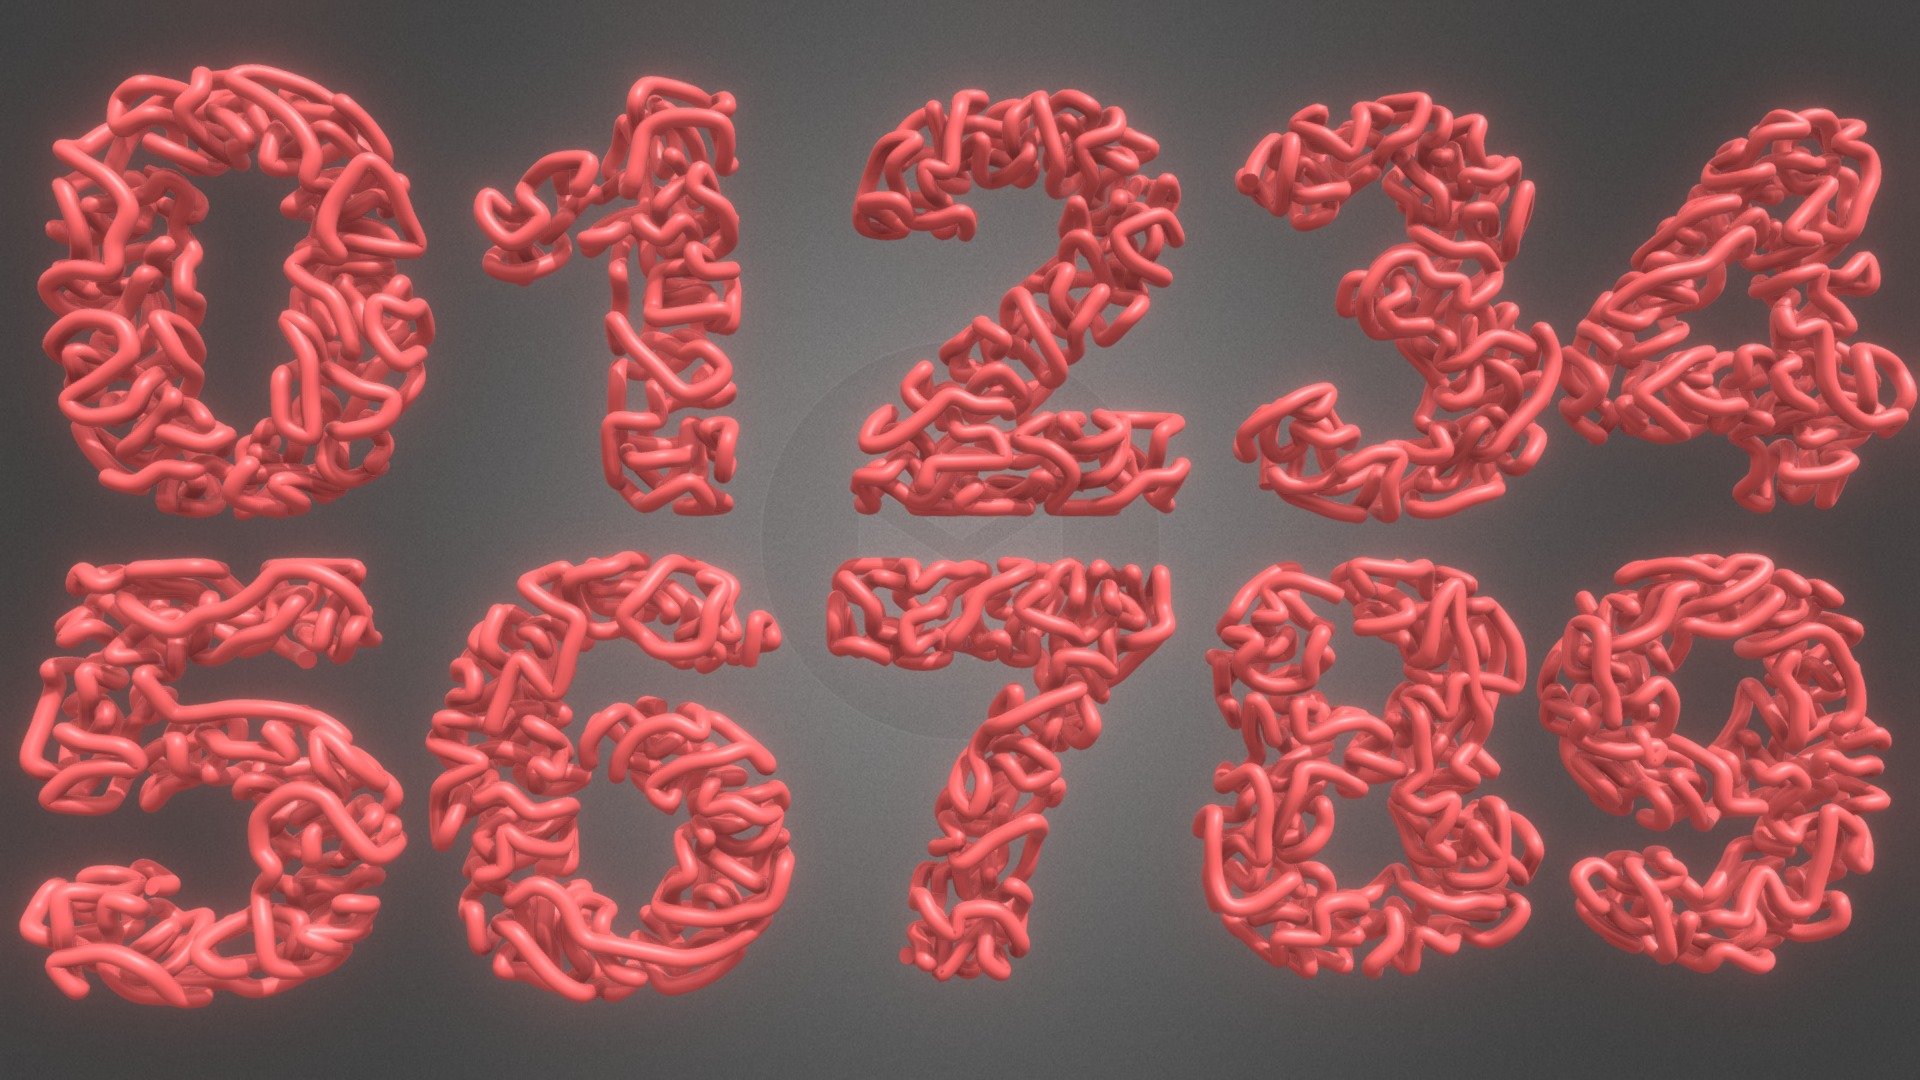 Quads only 
Each number, is a single spline strand
Ready to 3D Print
Game and VR ready (very light meshes)

I can customize for you
 - Words
 - Fonts
 - spline diameter 
 - spline density 
 - mesh density
 In fact, I can &ldquo;grow